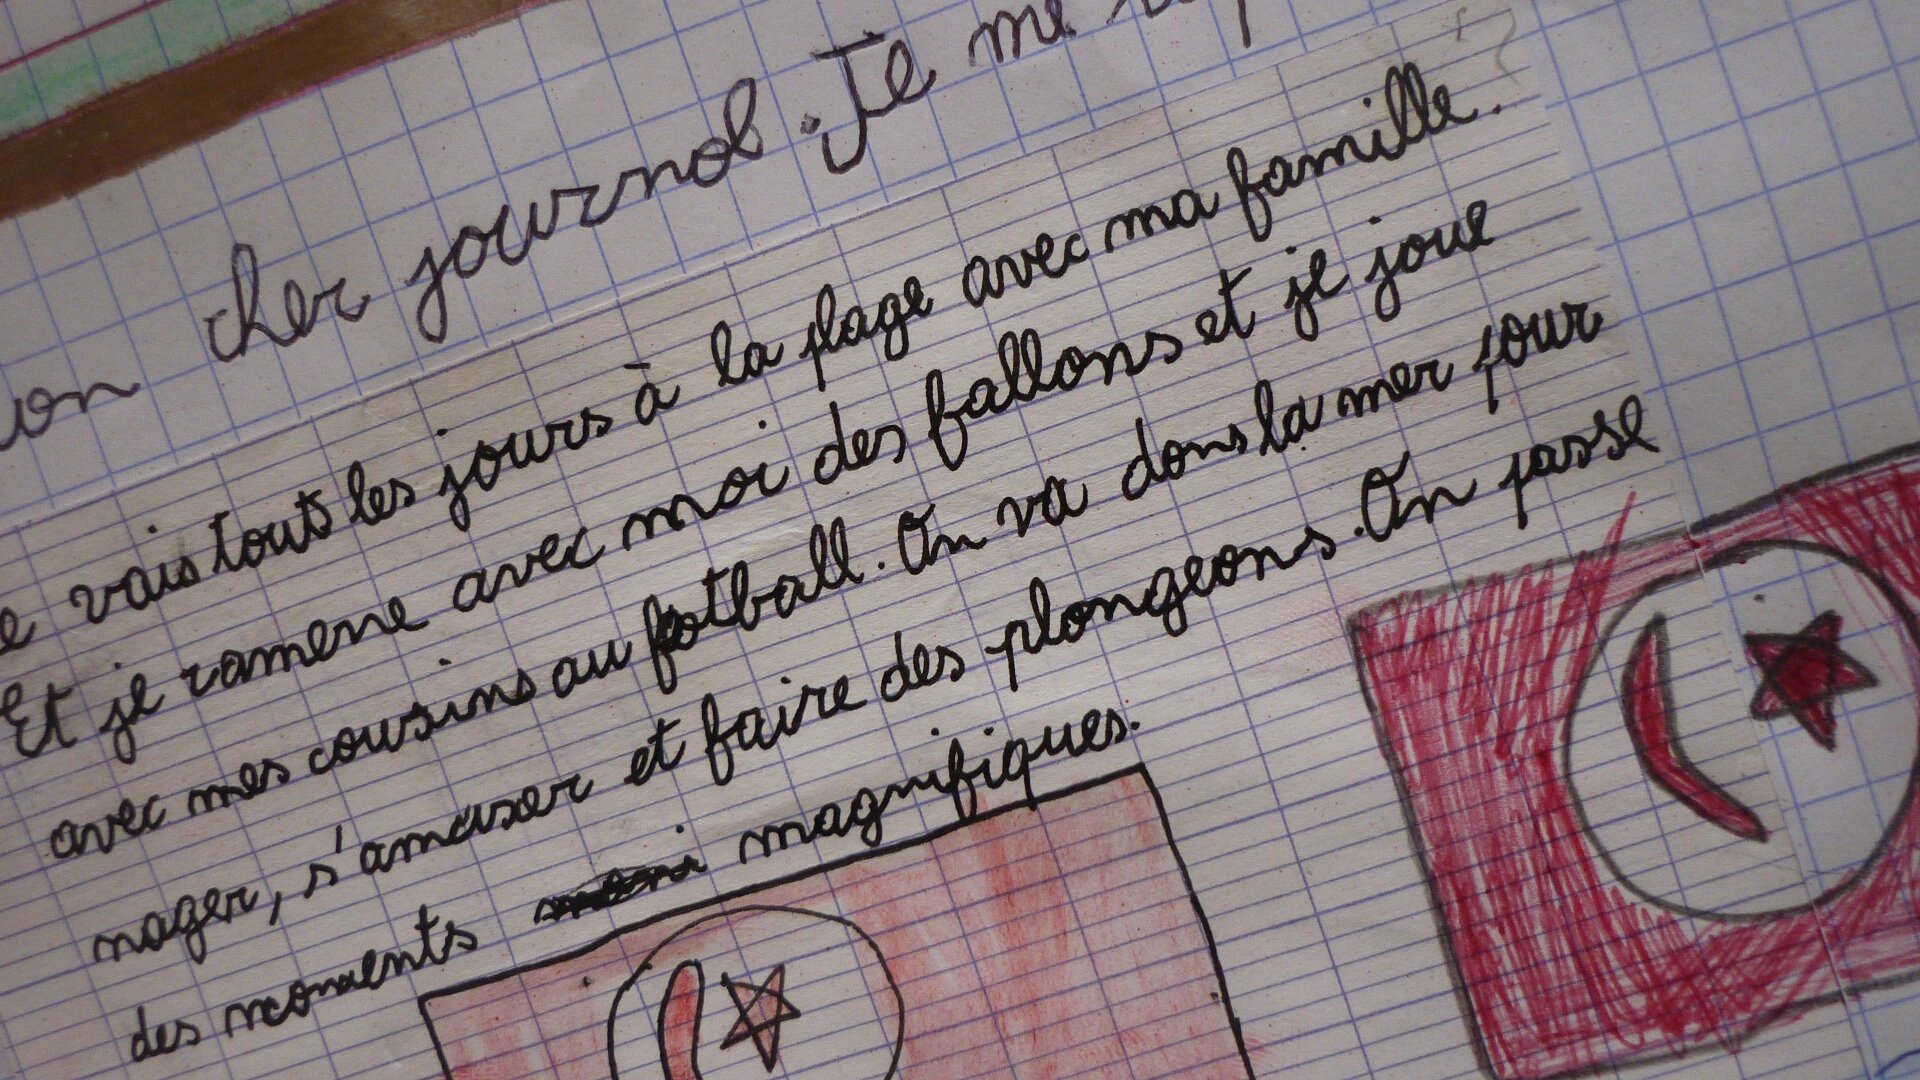 cher journal intime